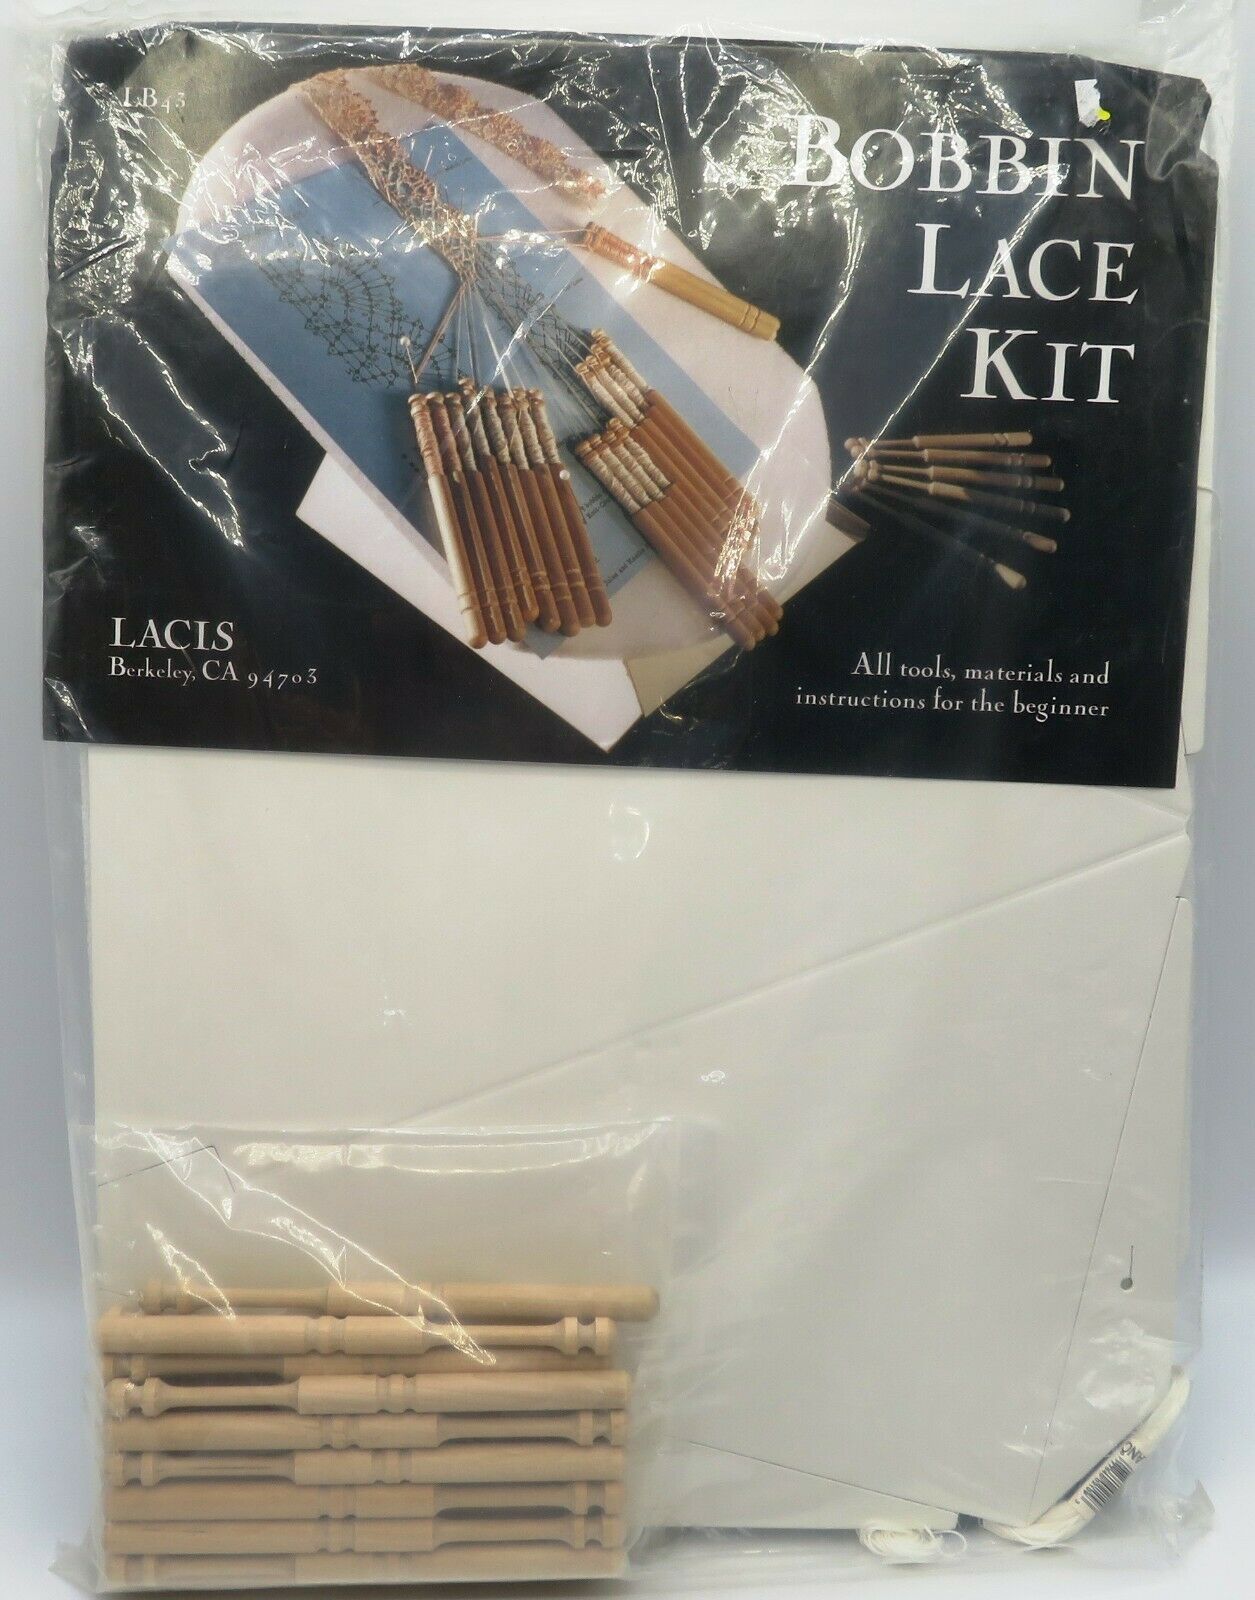 Bobbin Lace Kit By Lacis For The Beginner Includes All Materials & Instructions